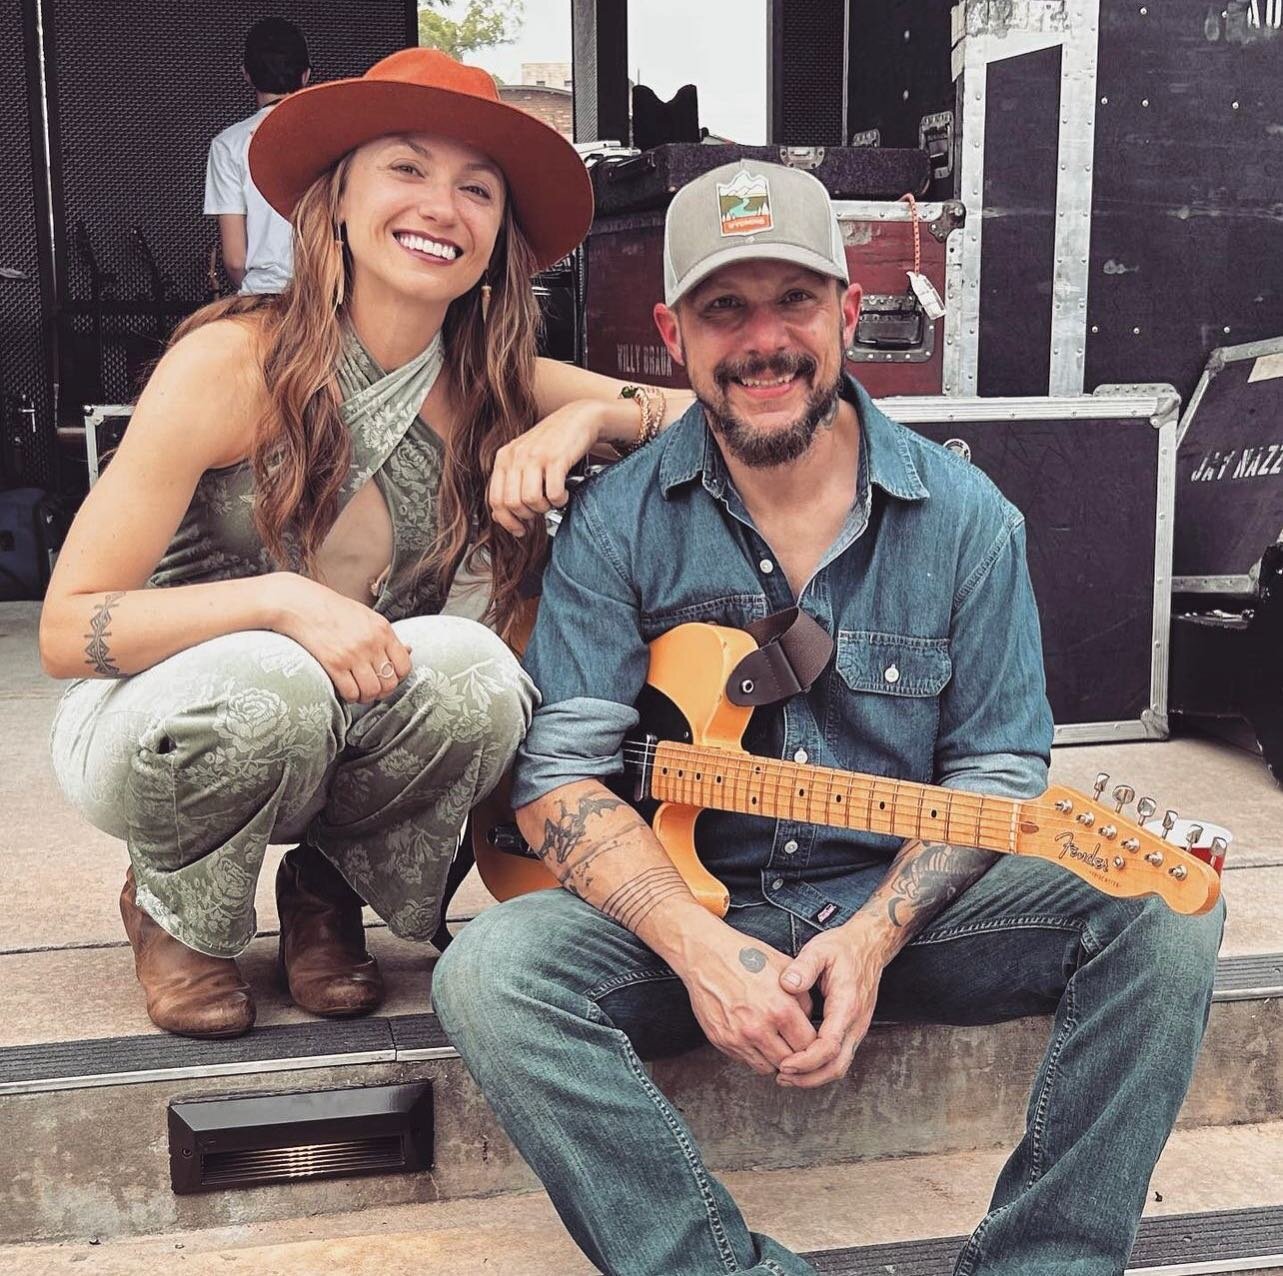 Any night with @fewmilessouthmusic is a good one, come see them Saturday at 7PM at the brewery! 

Few Miles South is a female fronted, national touring country and roots group created by Grammy nominated producer/engineer, Blake English, and classica